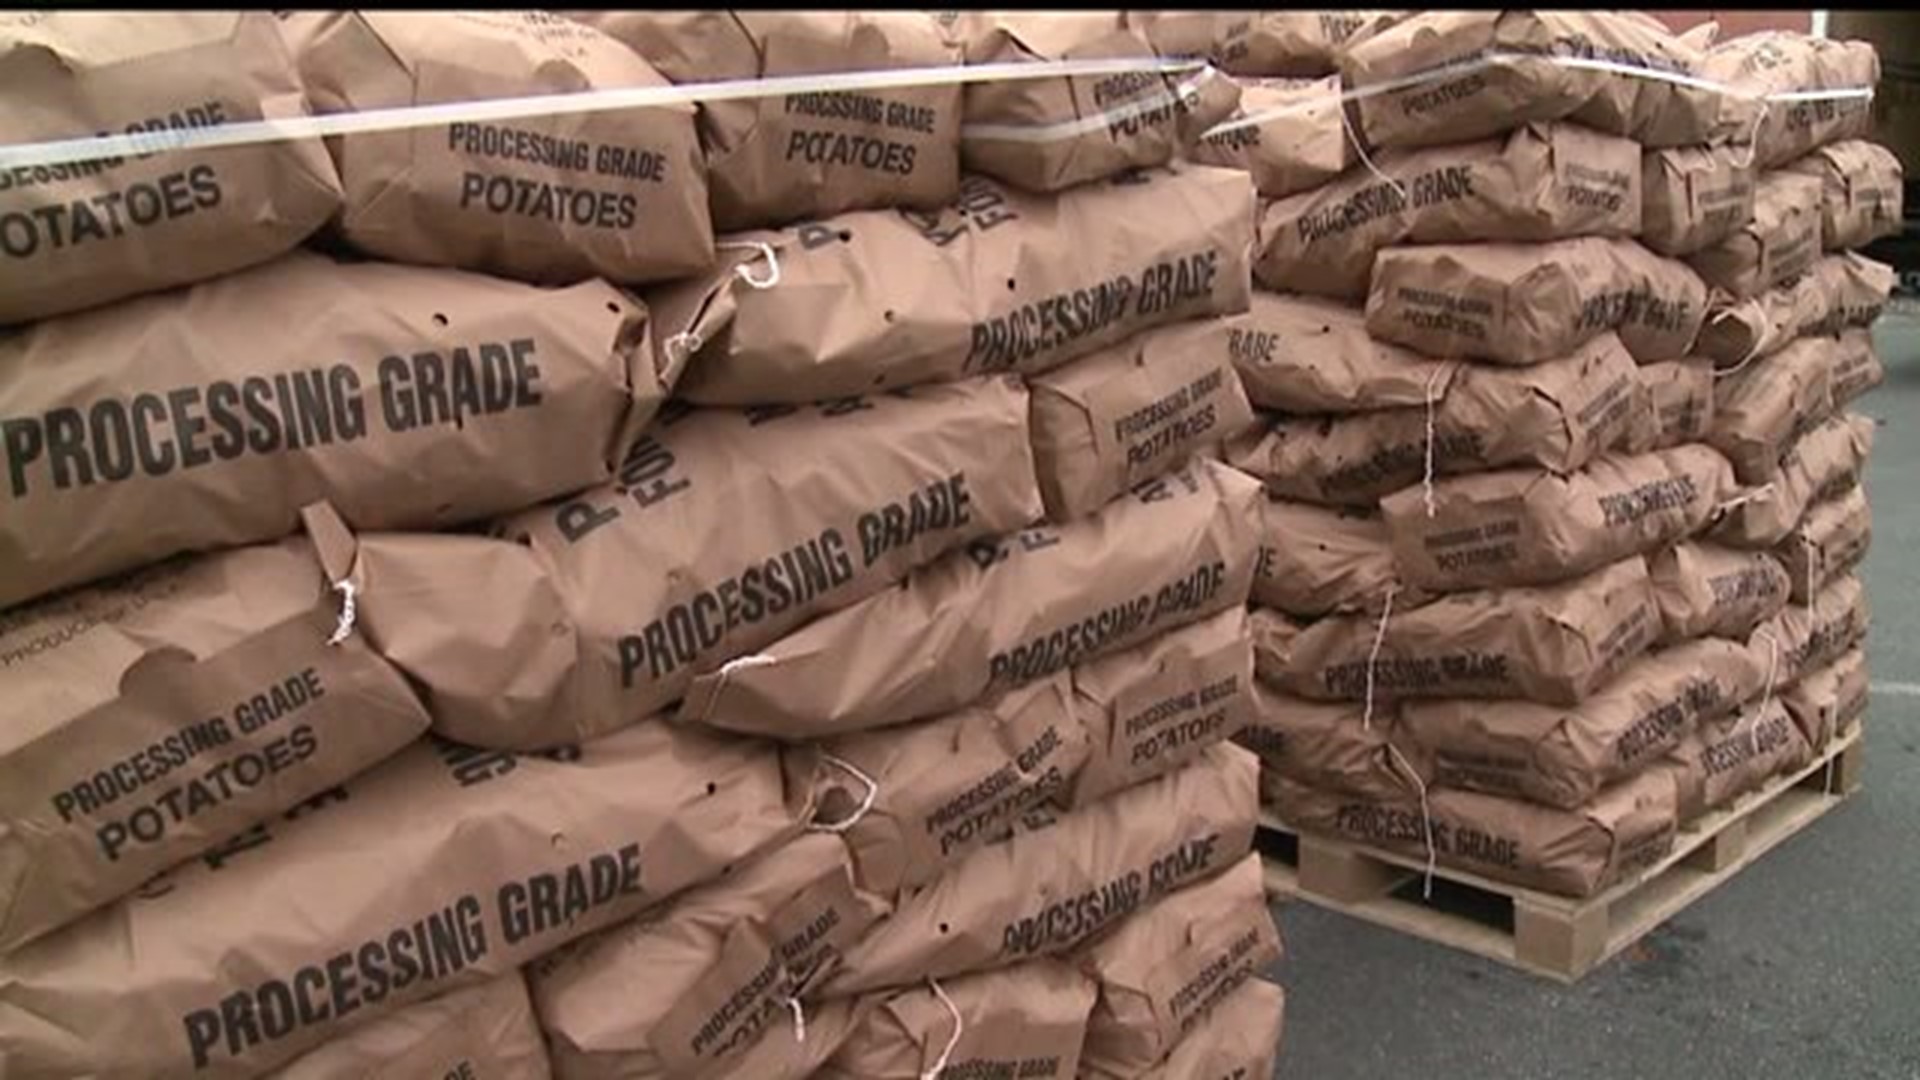 Cumberland County church receives 40,000 pounds of potatoes to give to the needy